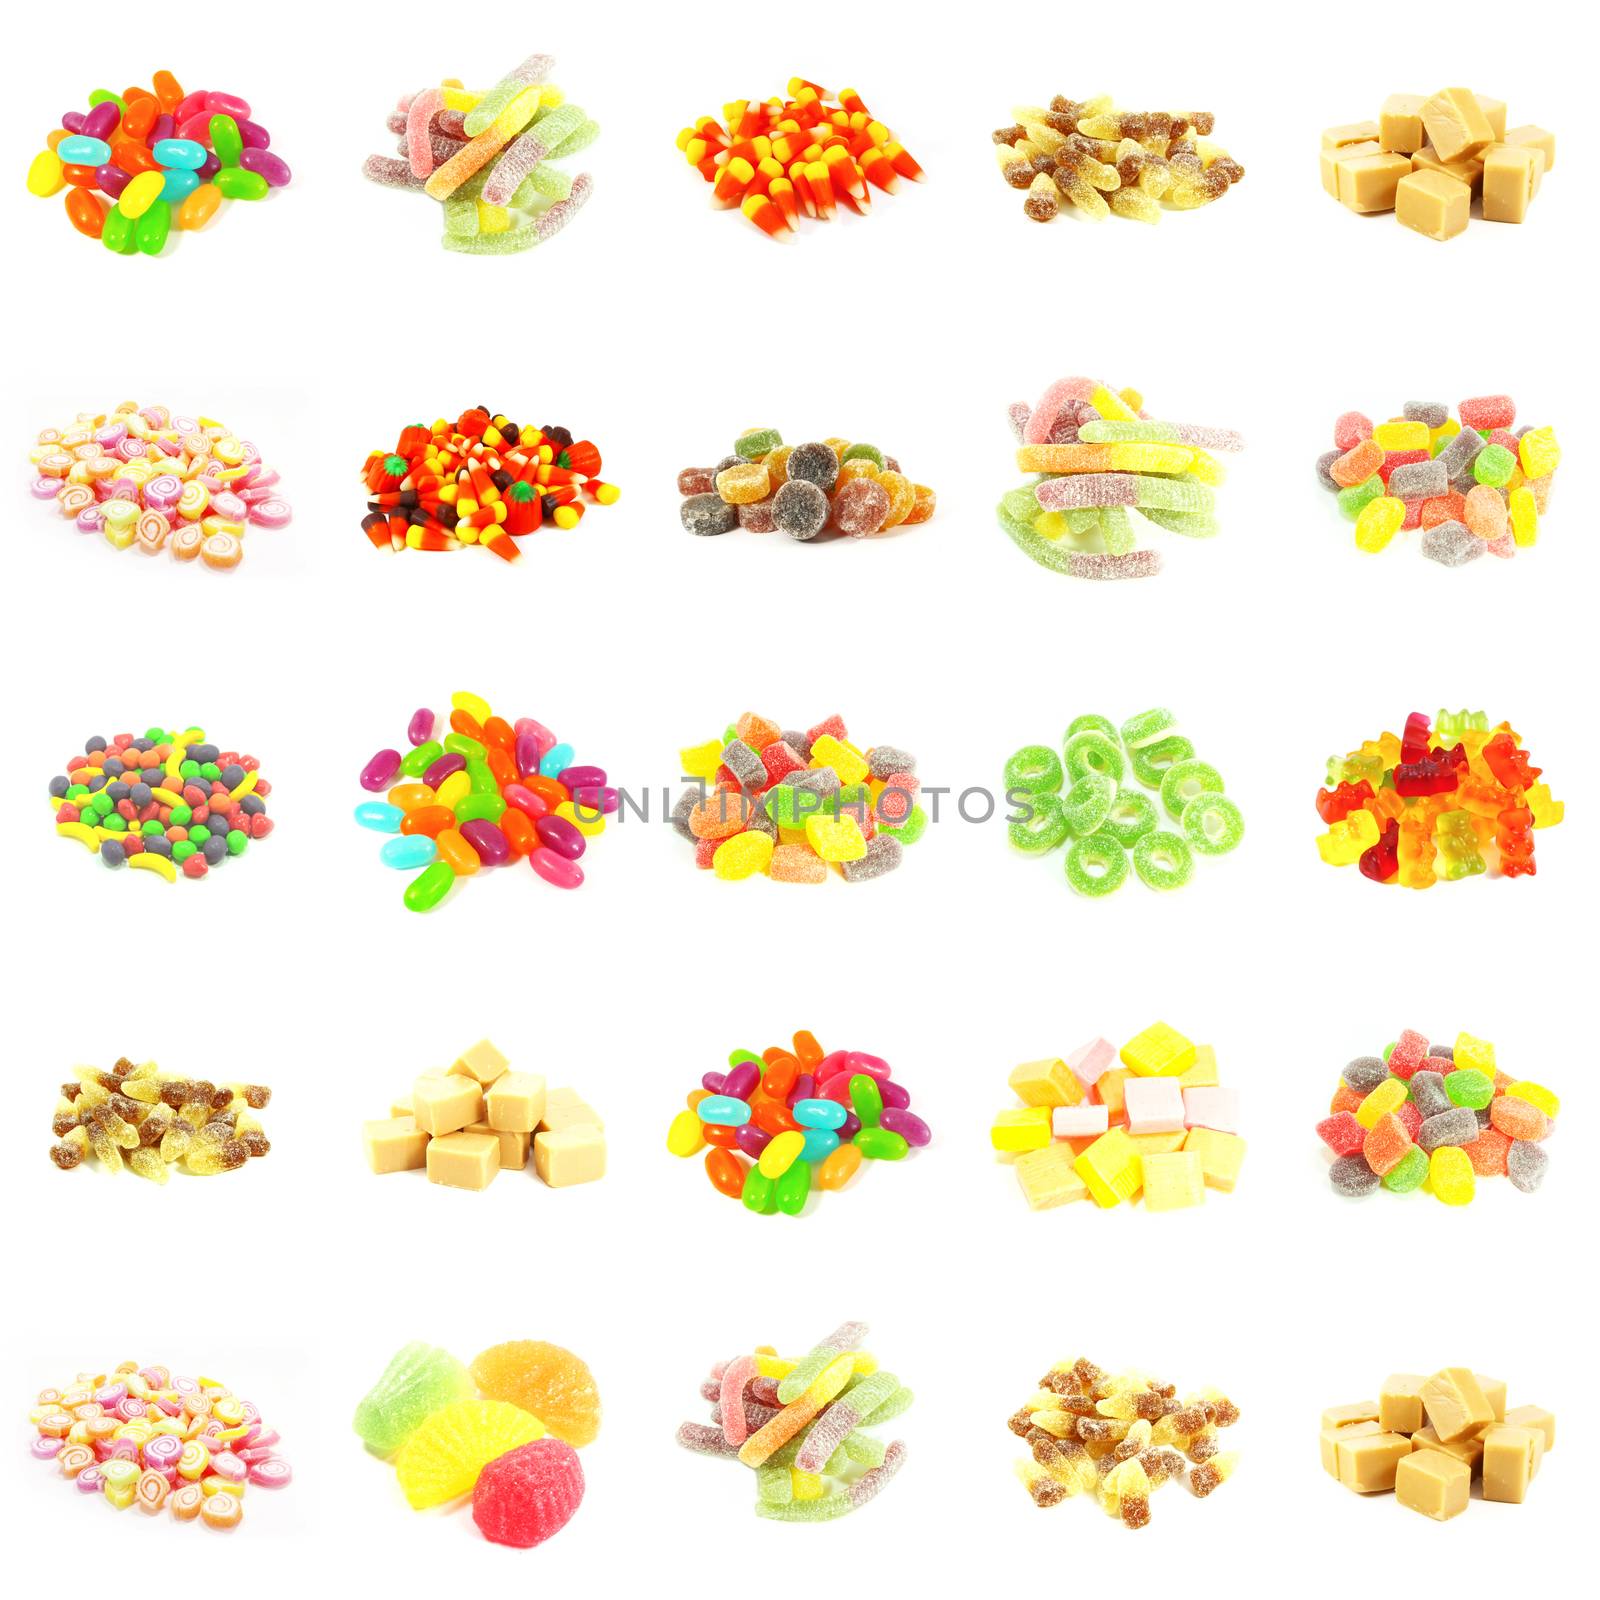 Repeating Candy Background by kentoh